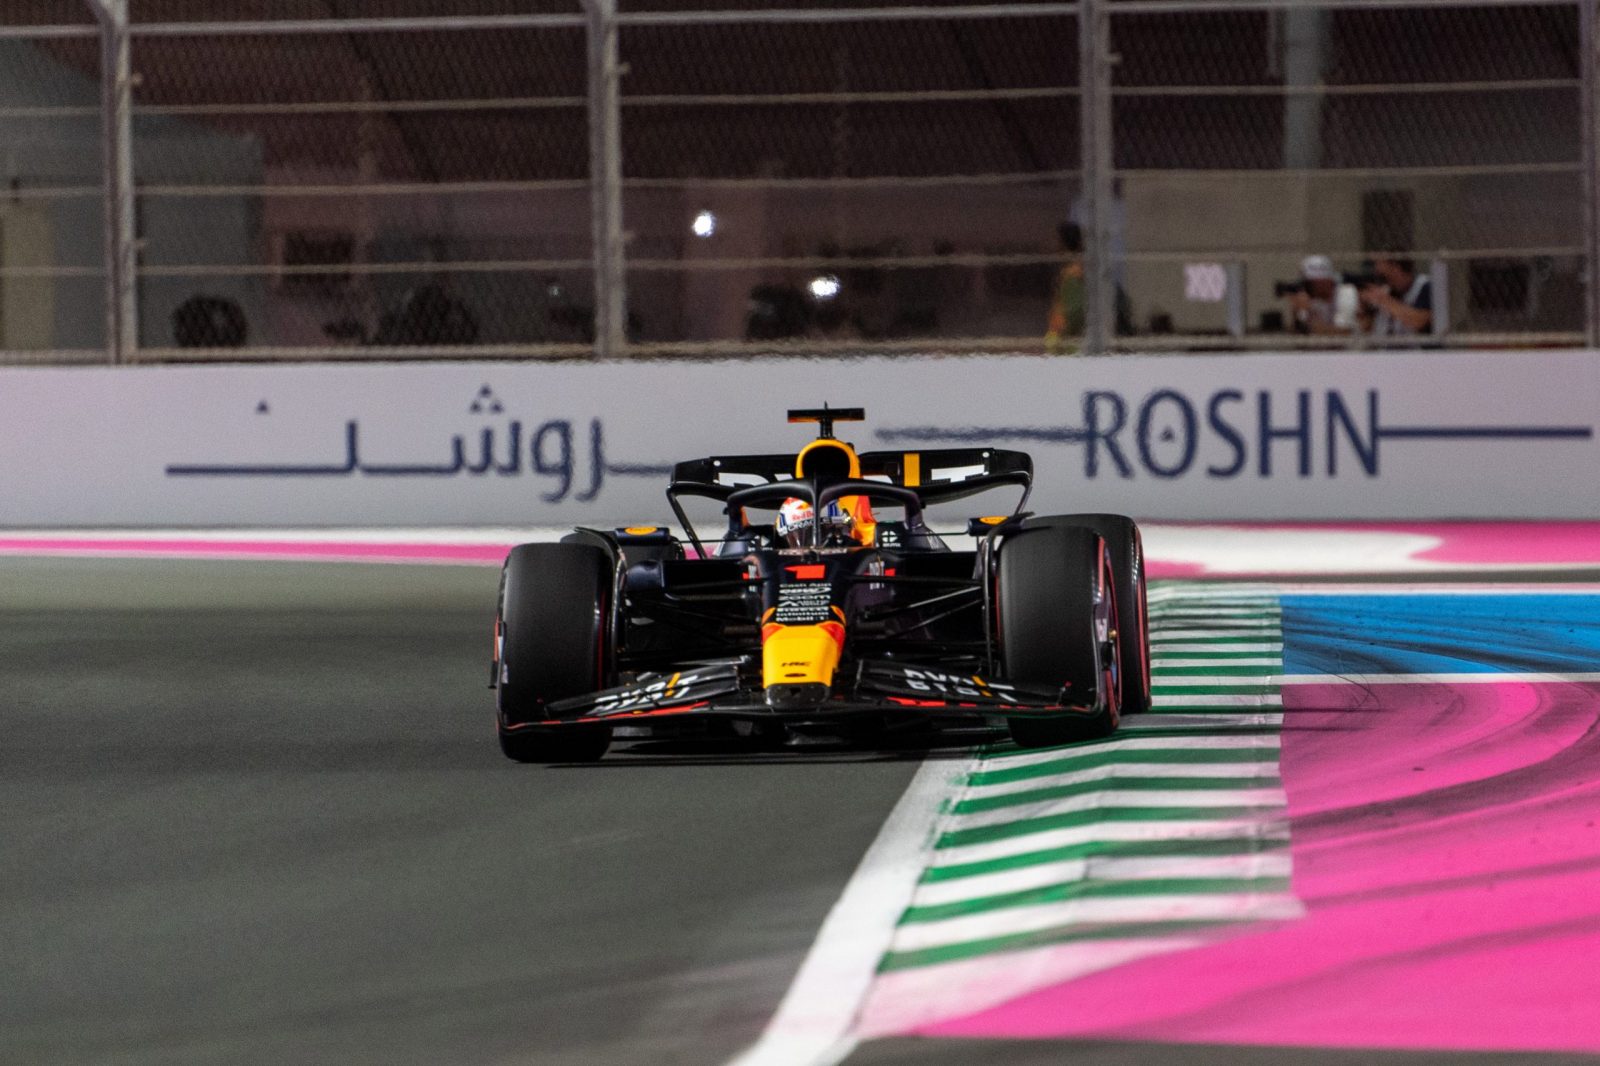 epa10528944 Dutch driver Max Verstappen of Red Bull Racing in action during the second practice session at the Jeddah Corniche Circuit, Saudi Arabia, 17 March 2023. The Formula One Grand Prix of Saudi Arabia will take place on 19 March.  EPA/STR